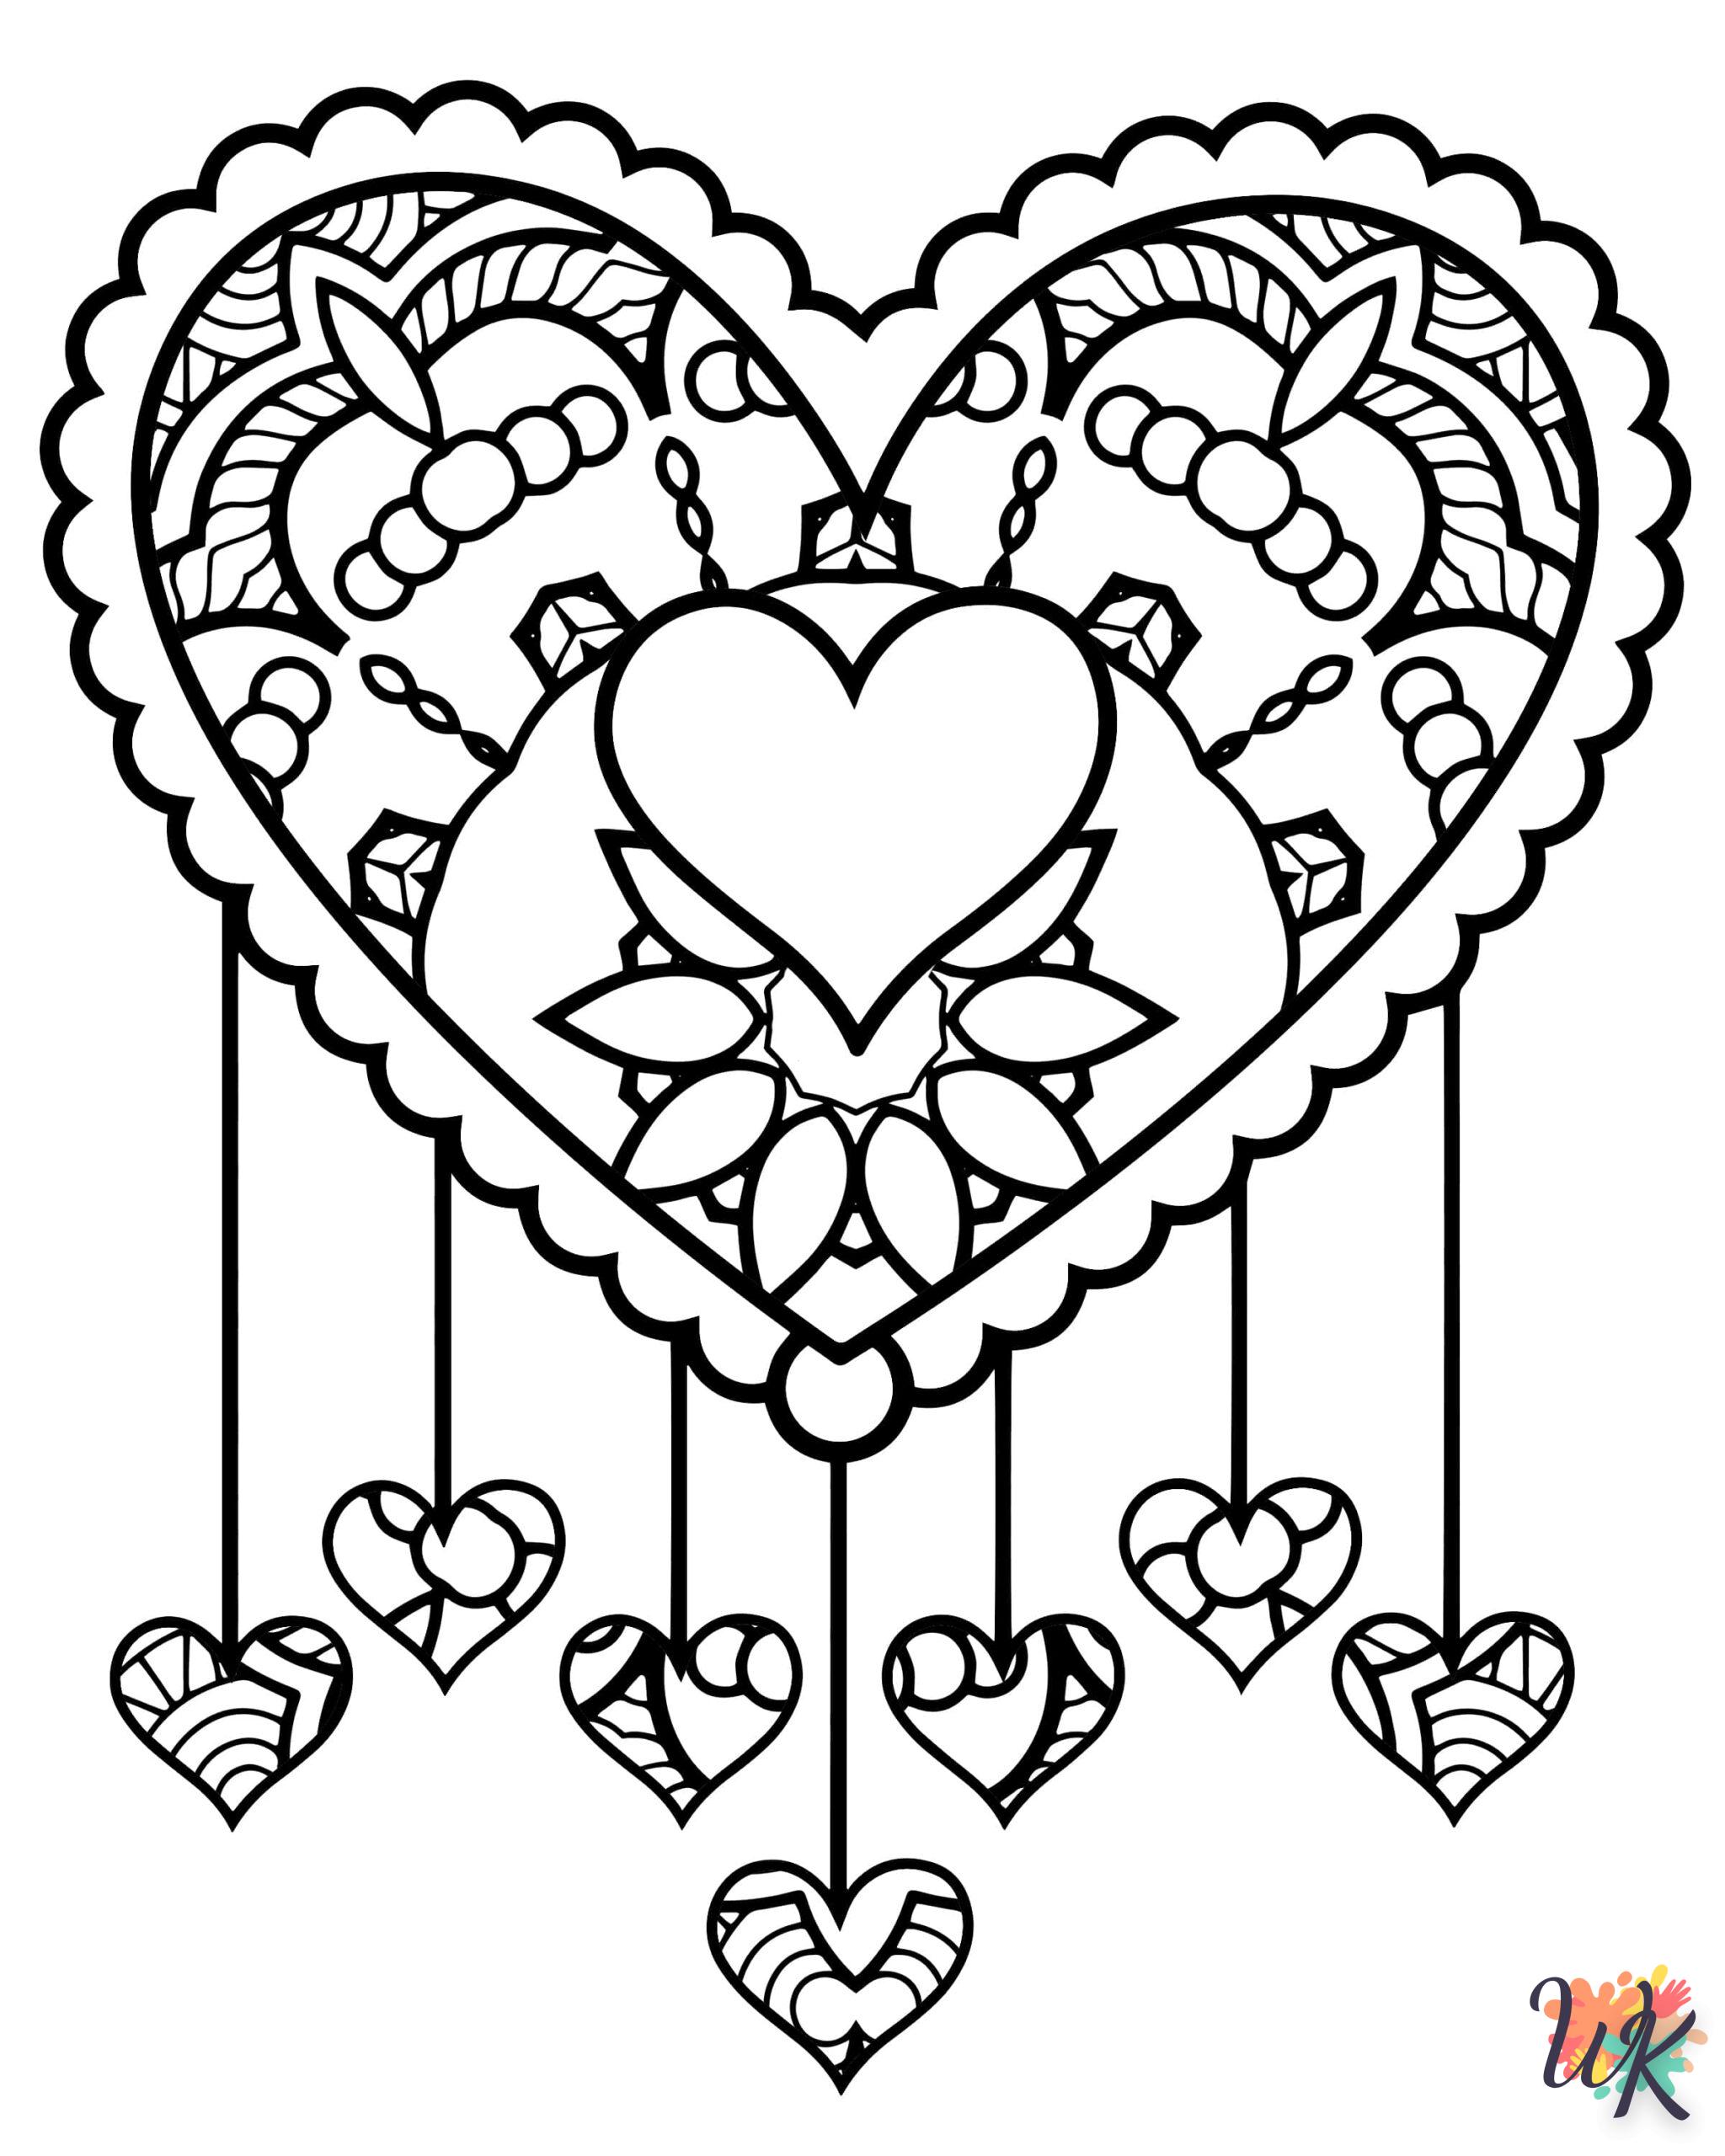 Heart coloring page for a 7 year old child to print 1